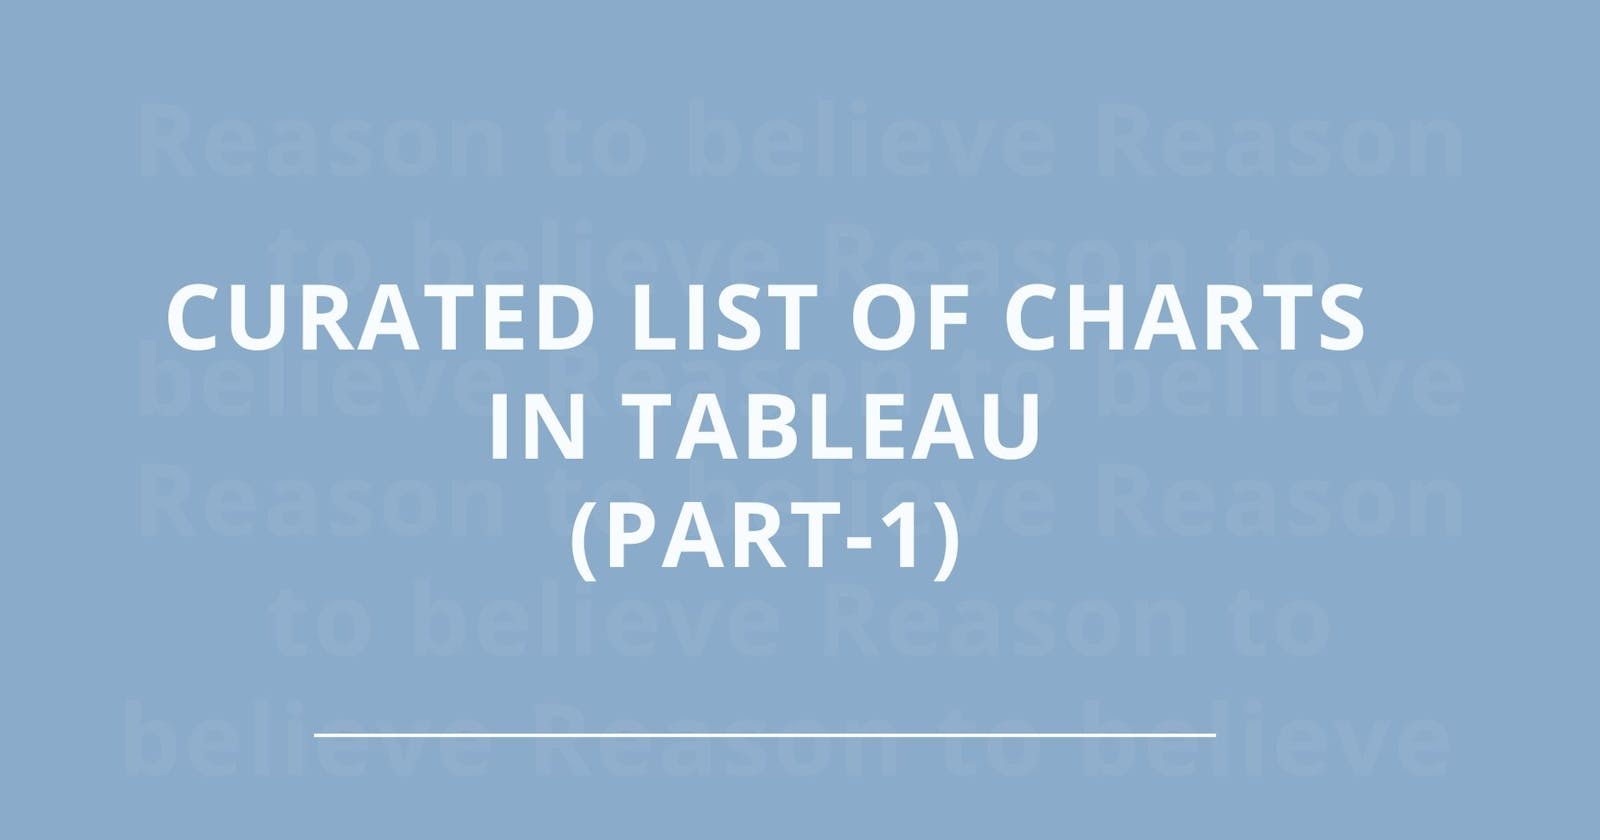 Curated list of charts in Tableau (Part 1)